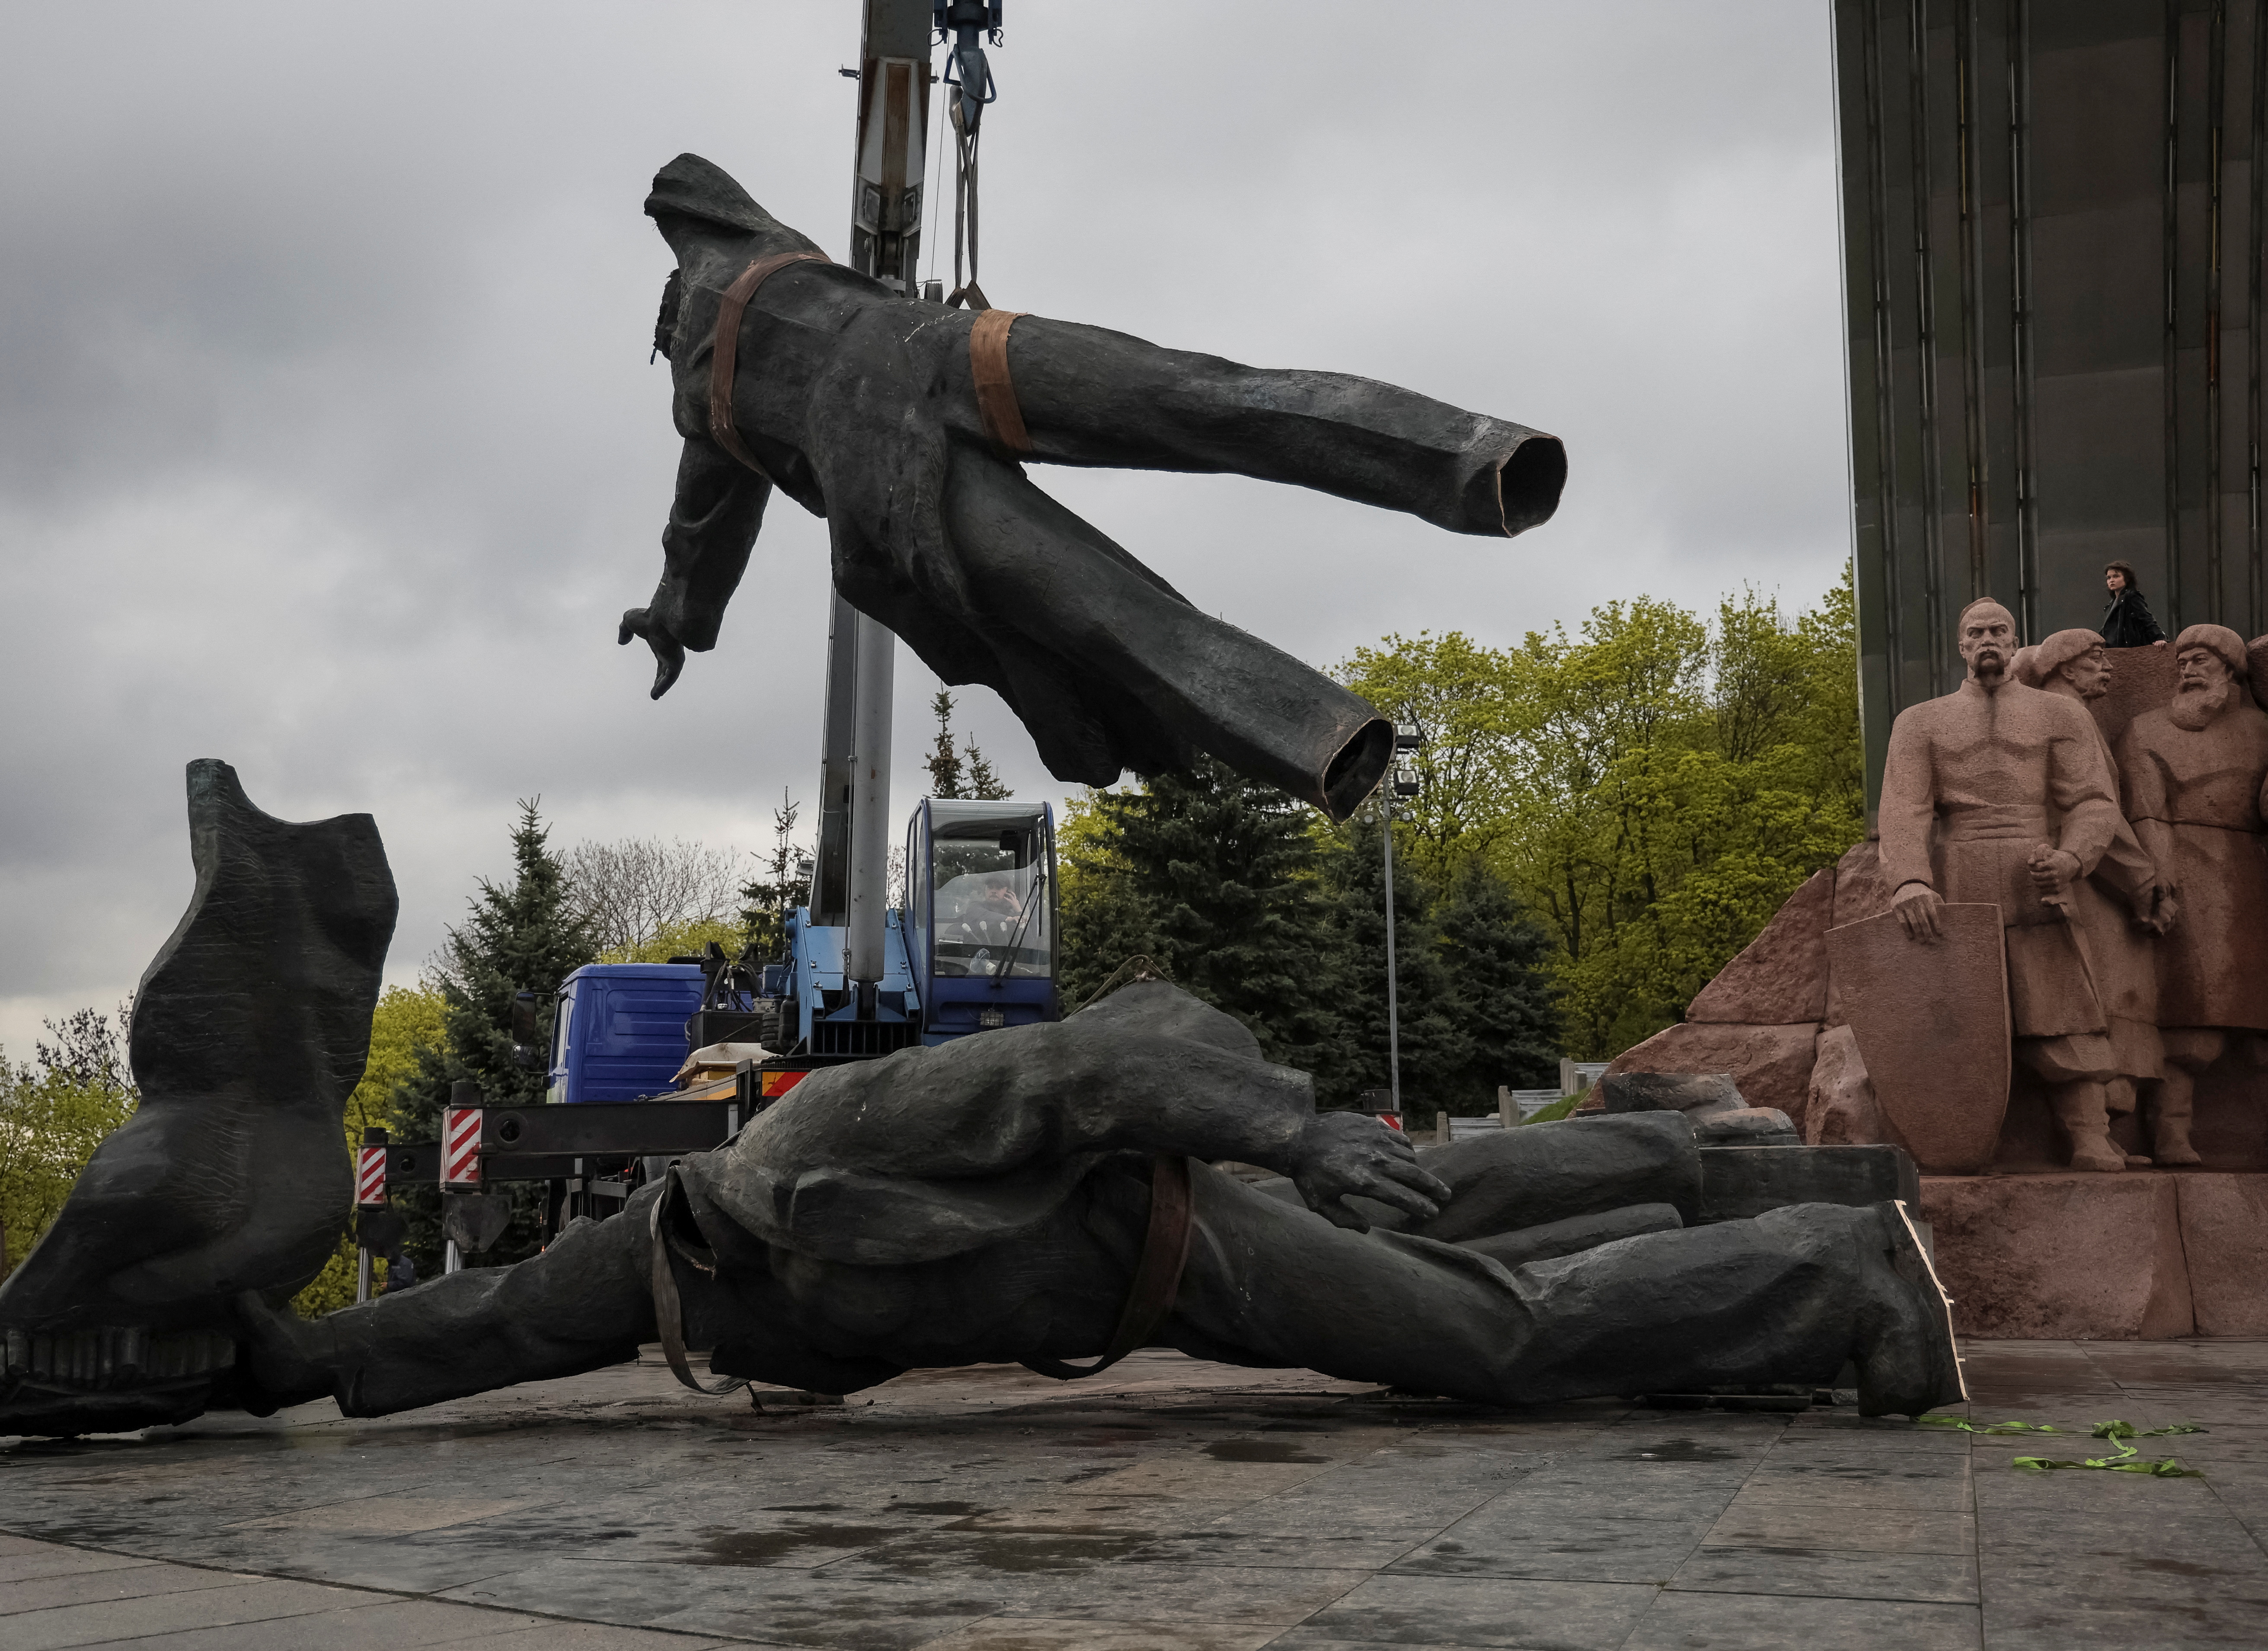 A Soviet monument to a friendship between Ukrainian and Russian nations is seen during its demolition in central Kyiv